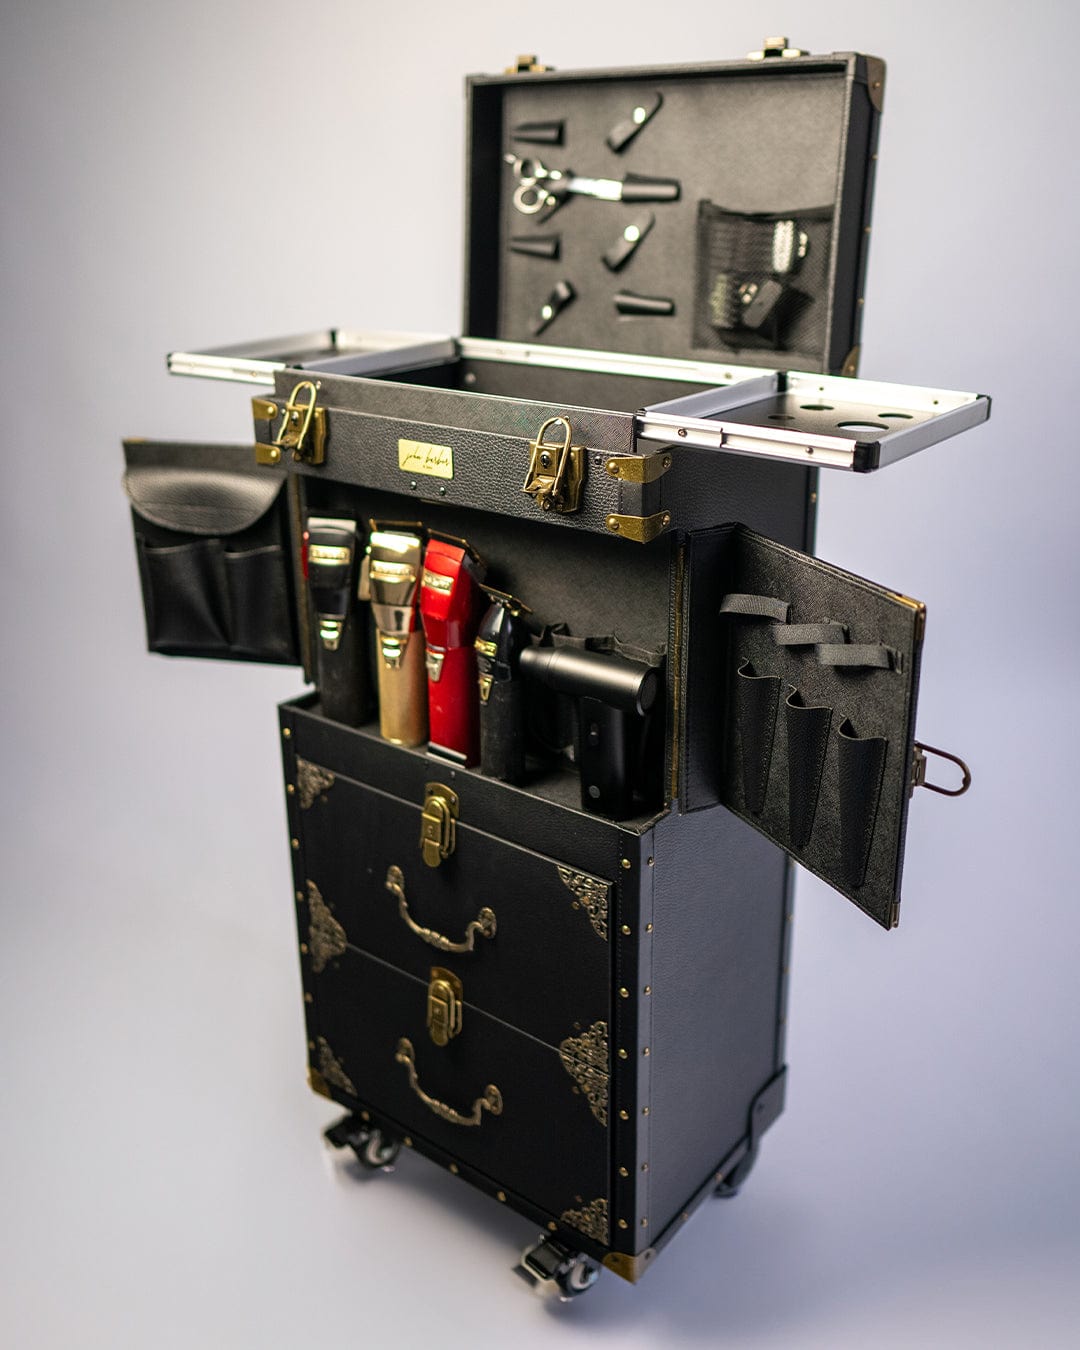 Mobile barber workstation in classic style